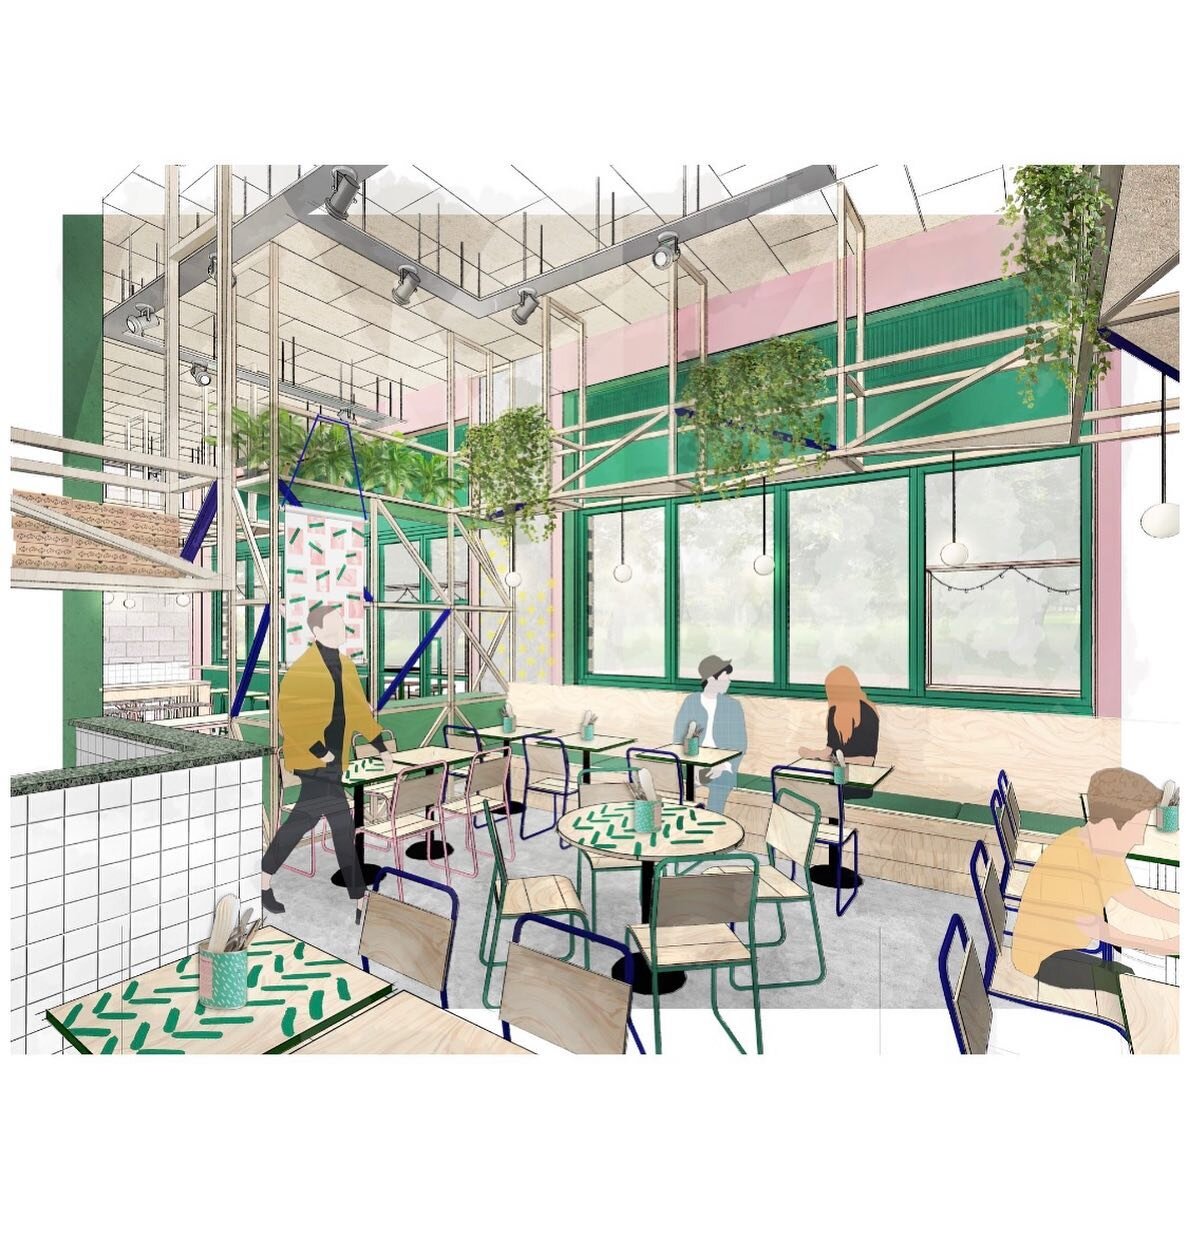 Today I&rsquo;m hoping to see the completed @4hundredrabbits pizza restaurant that opens next week in @elephantparklondon we are 1.5 years into the making of this one and everyone is very excited to see it finally completed! 🍕 🐇 🐰 💫 
Visuals by: 